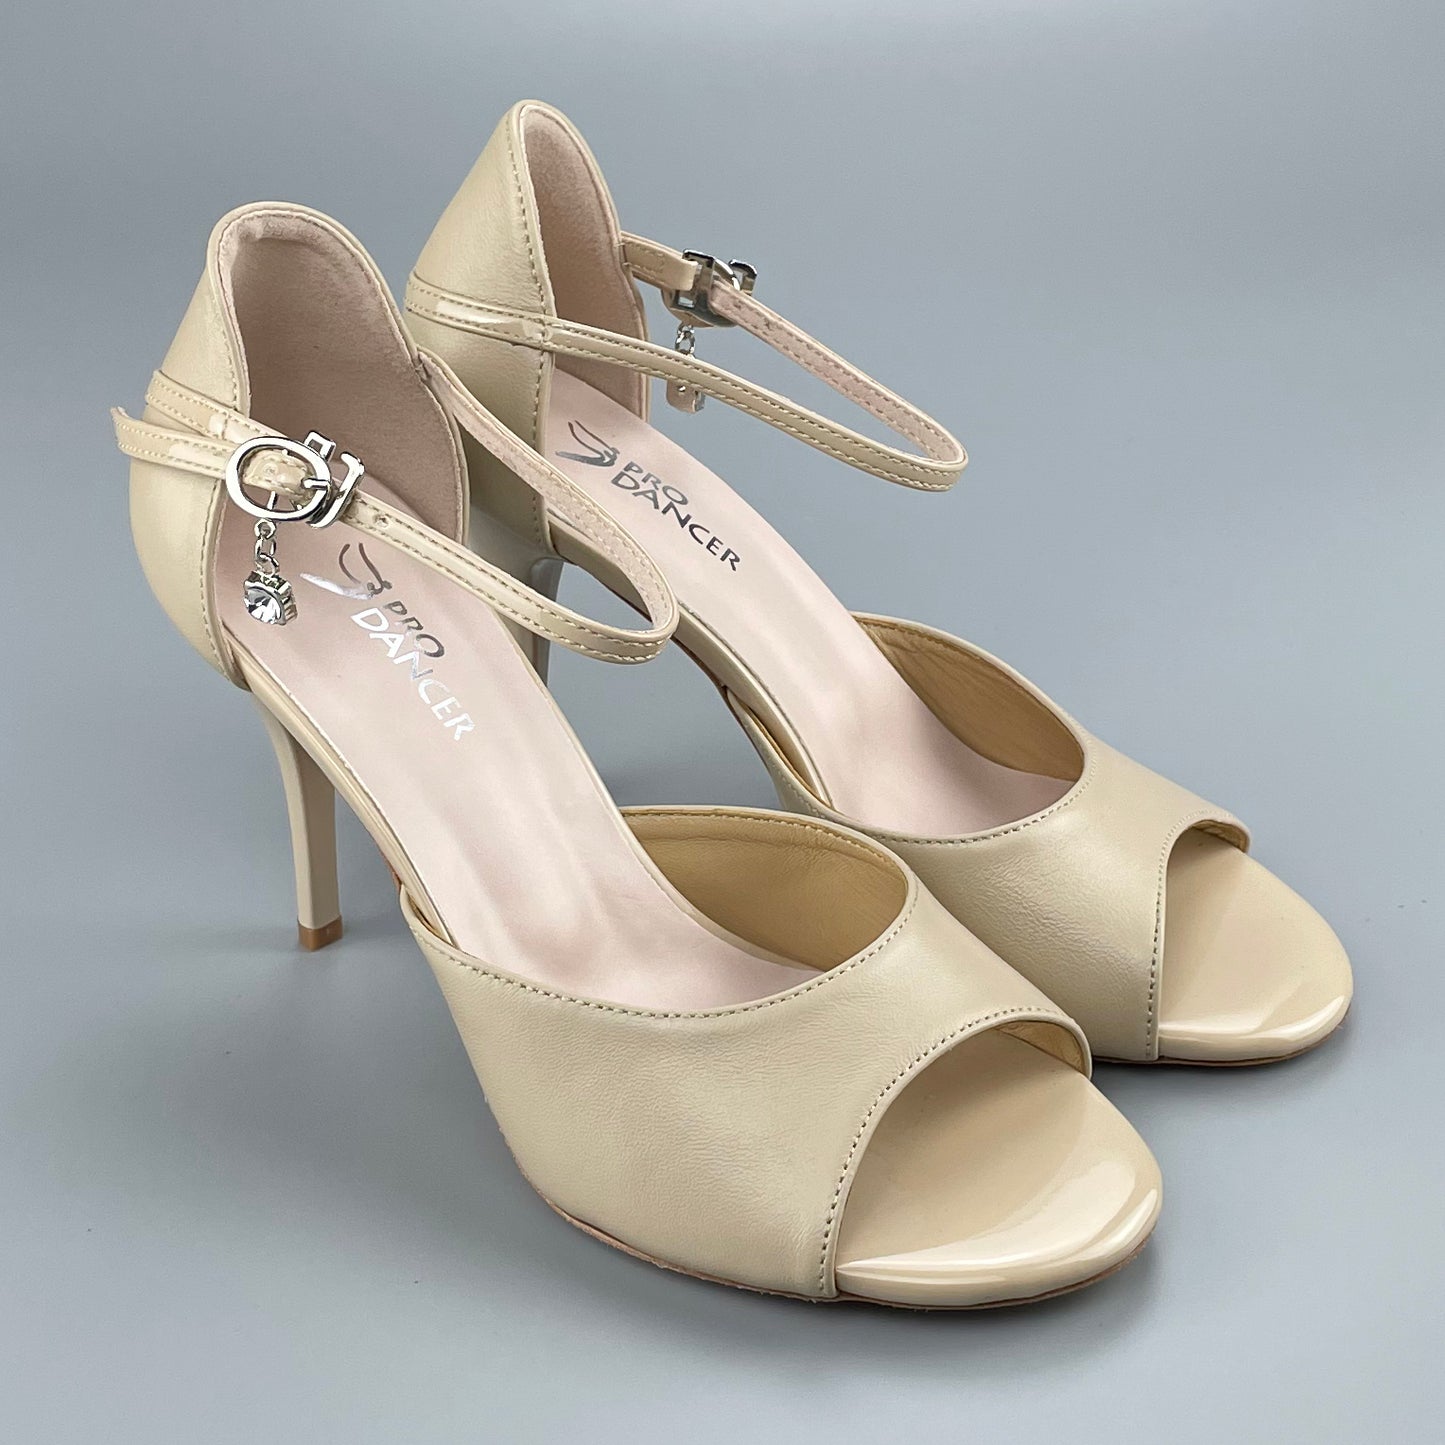 Pro Dancer Open-toe and Closed-back Argentine Tango Shoes High Salsa Heels Hard Leather Sole Sandals Nude (PD-9043B)